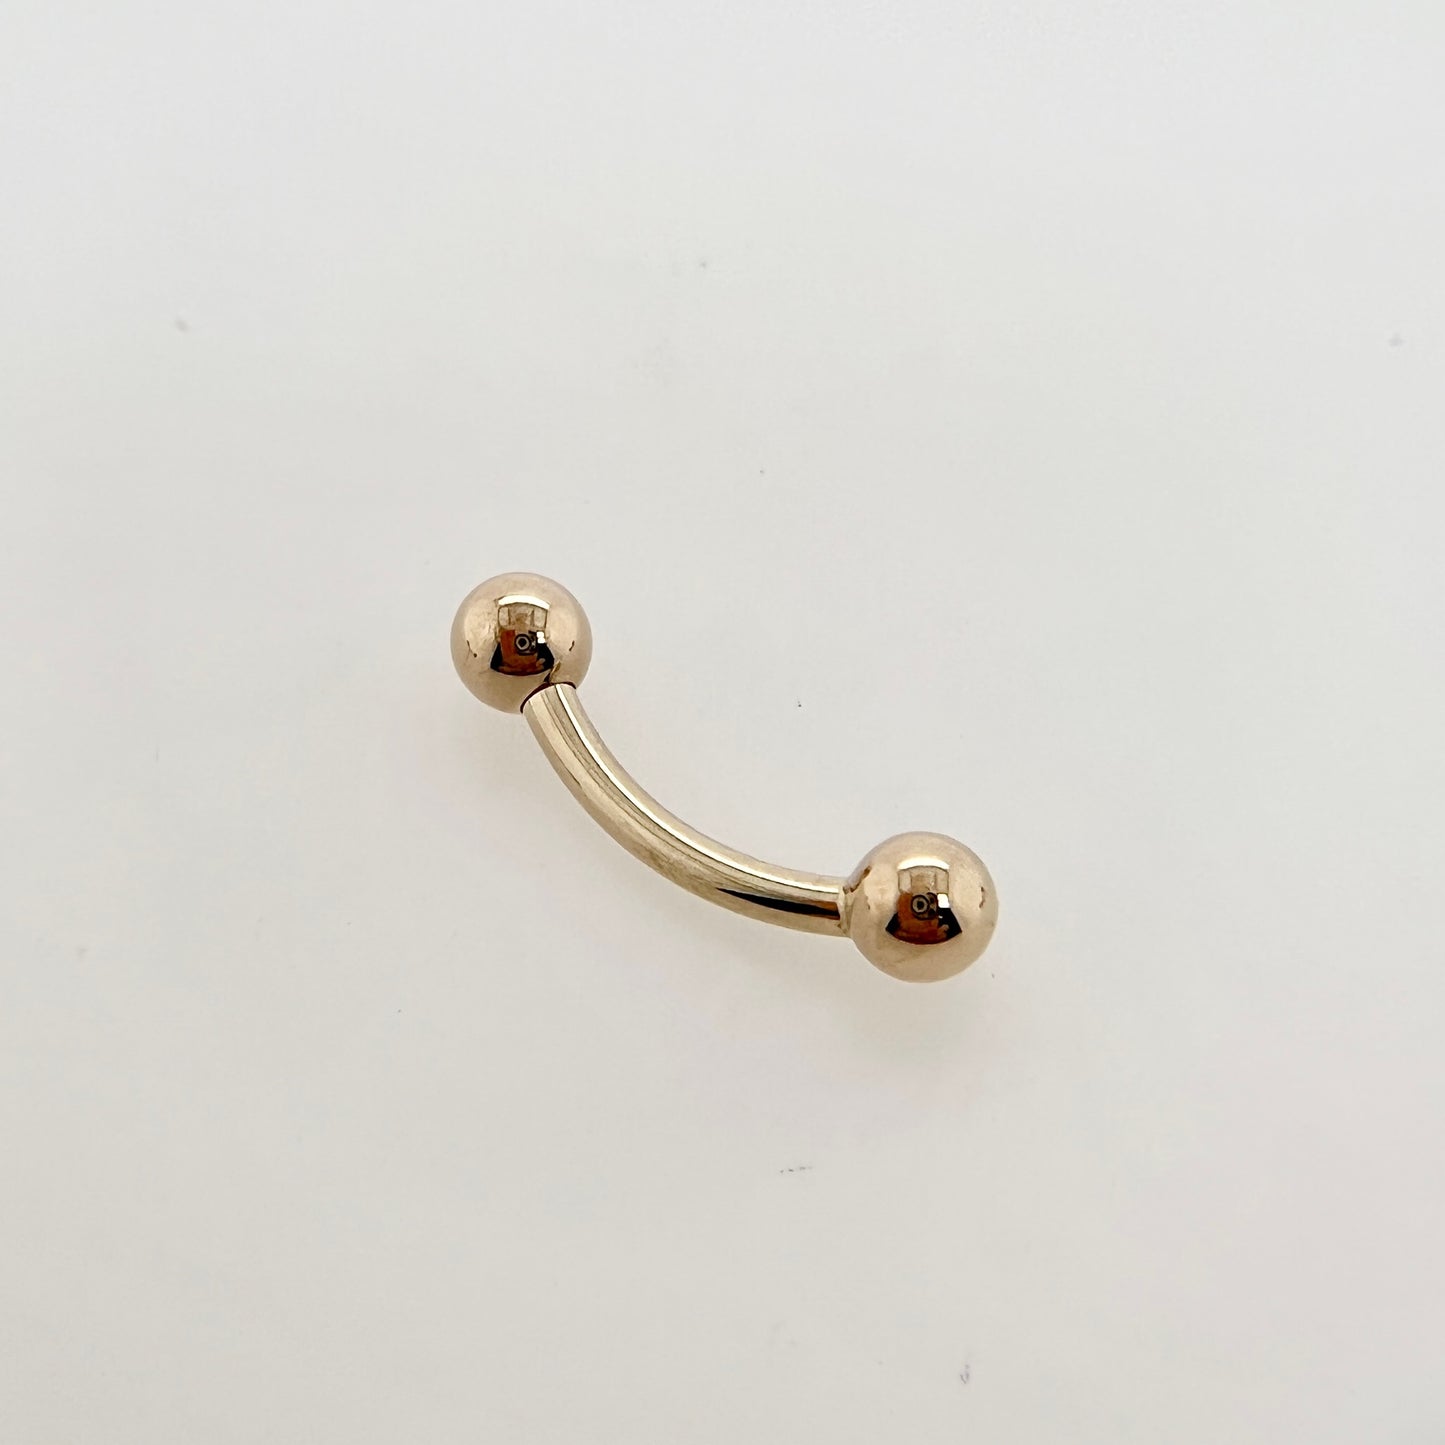 14g 3/8" Curved Barbell with 5/32" Beads